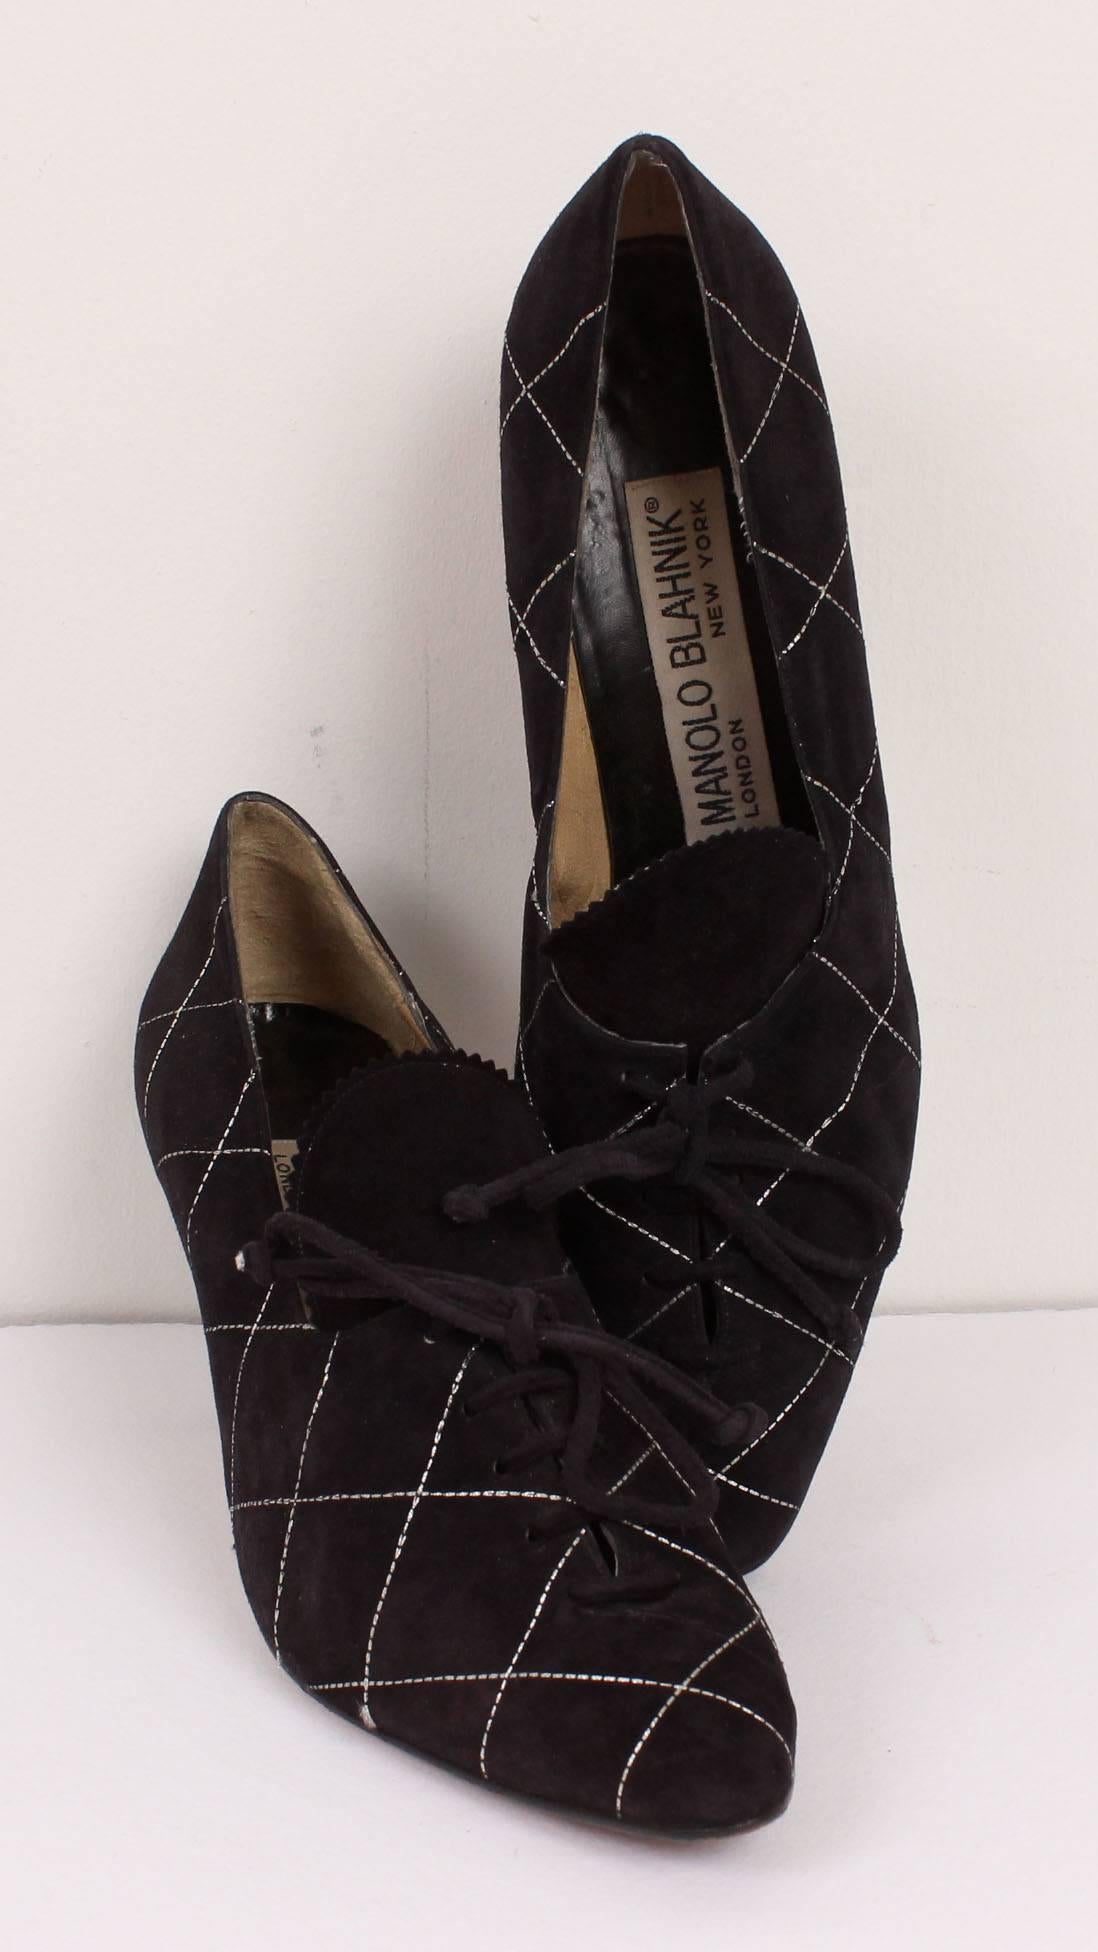 Women's Manolo Blahnik Early 1980's Black and Silver Suede Pumps